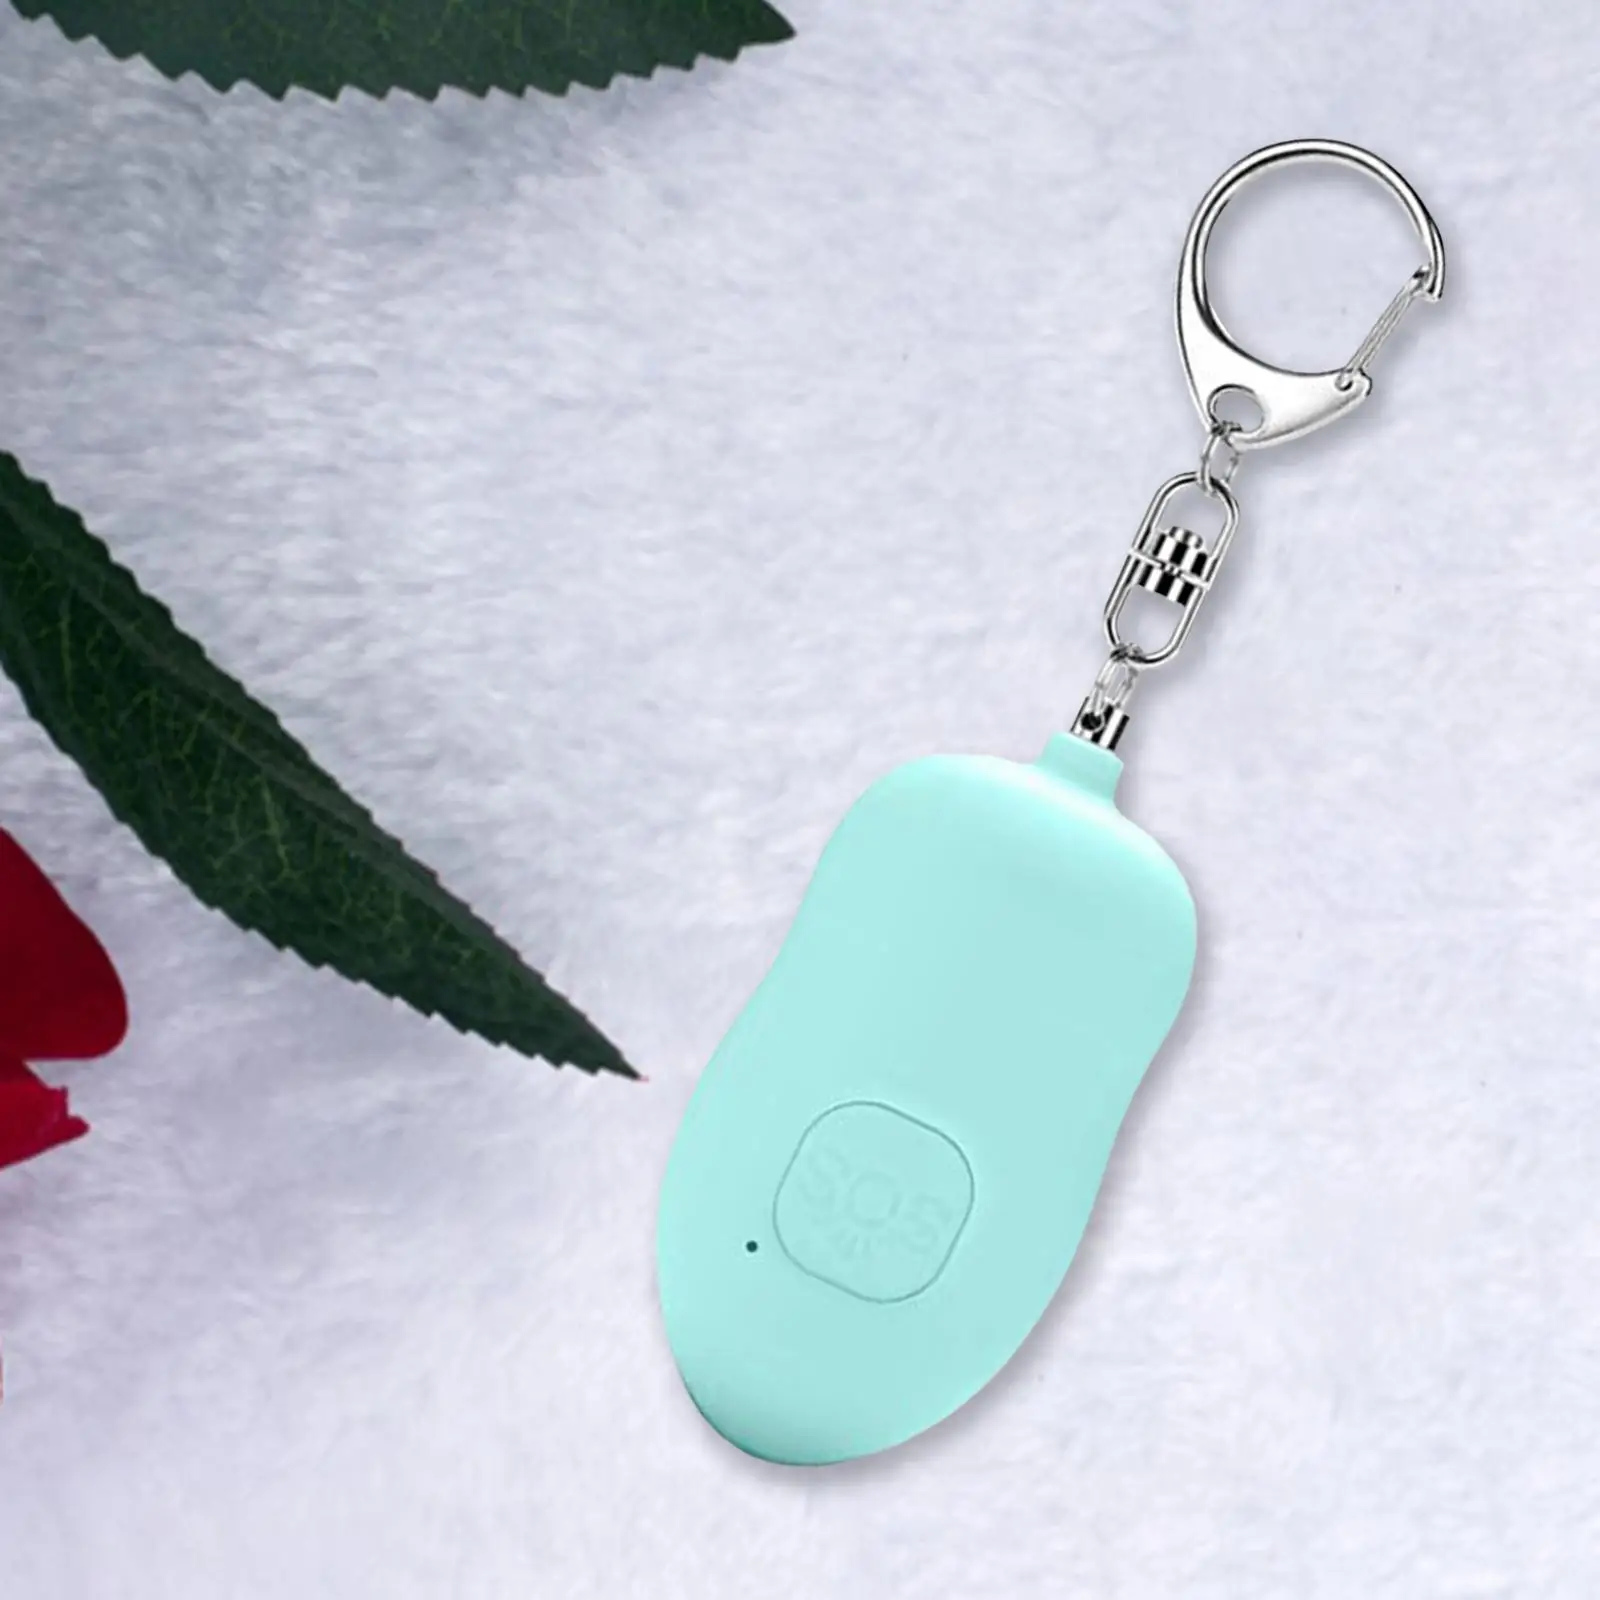 140dB Security Alarm Keychain Personal Alarm for Traveling Women Travelling